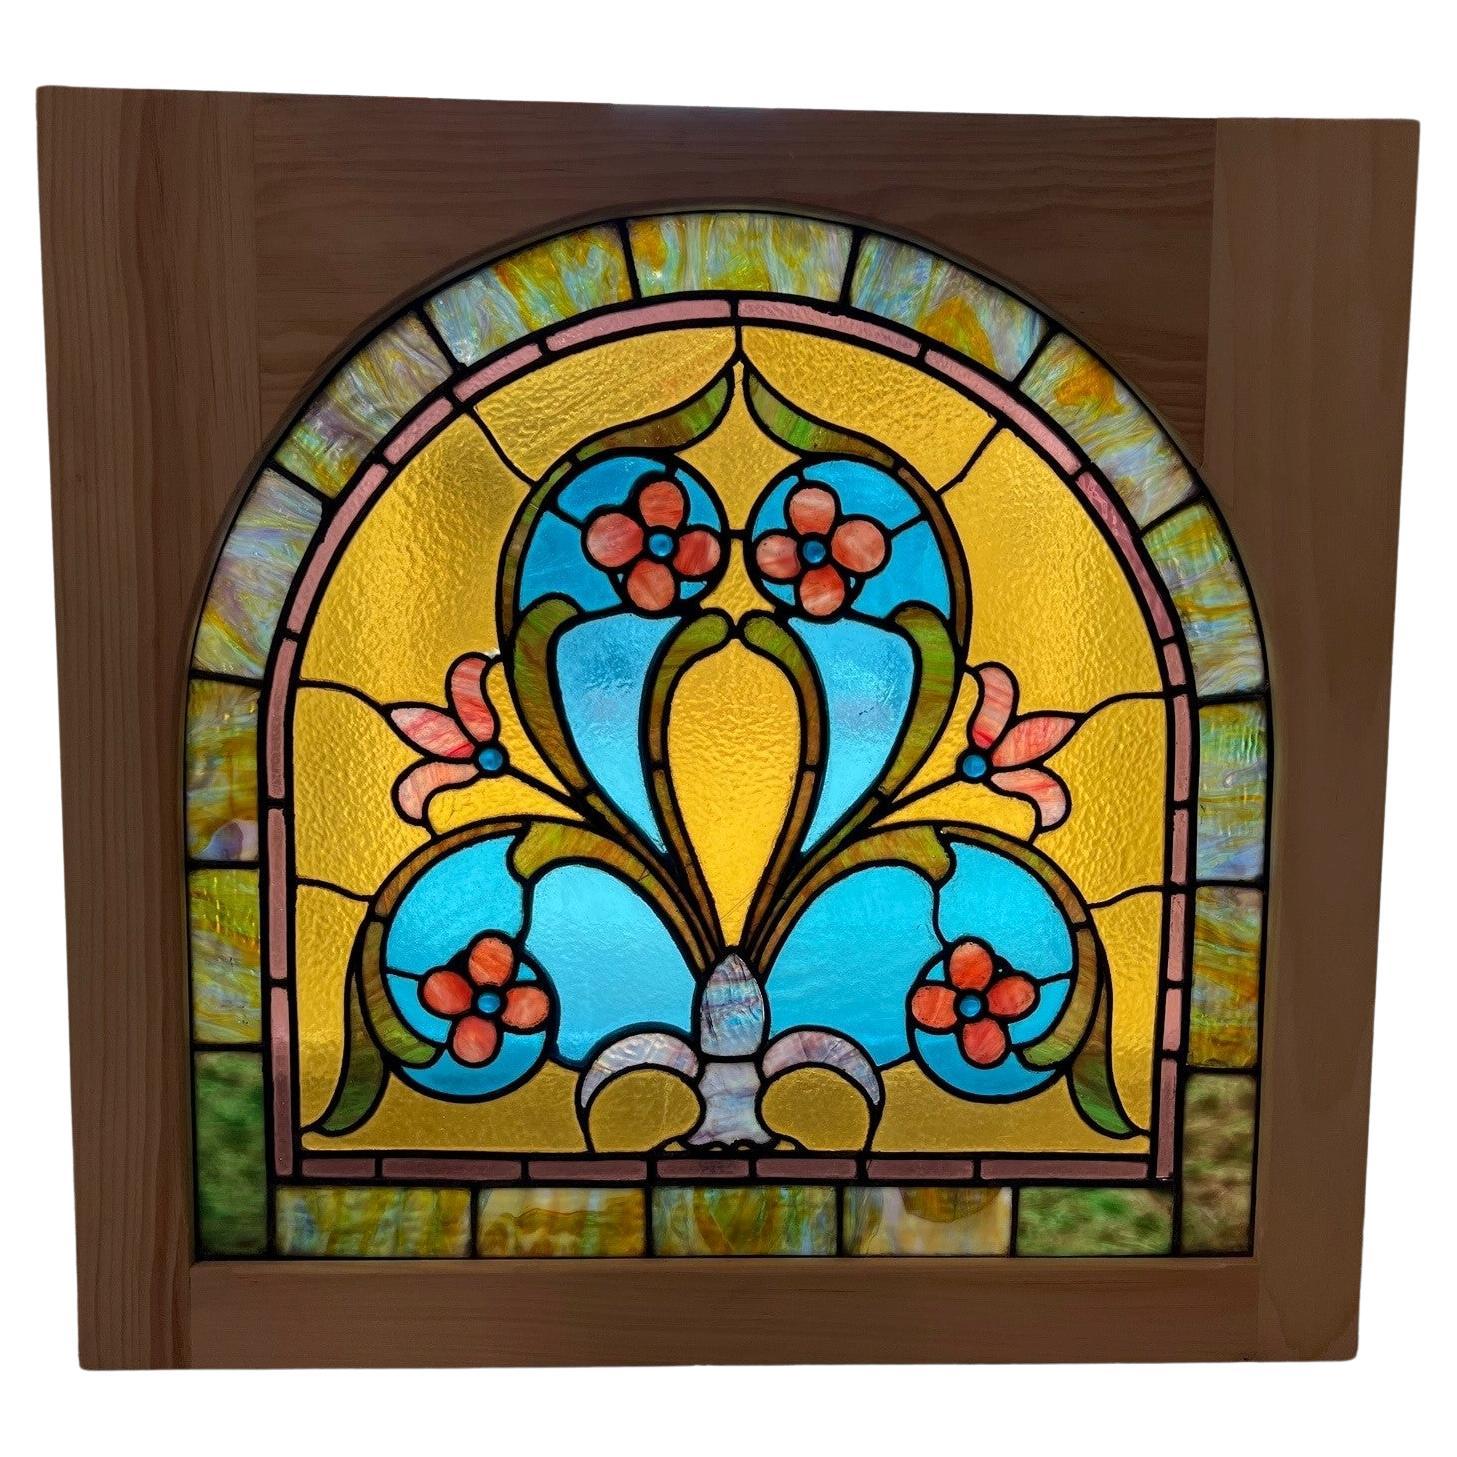 Late 19th Century Antique Arched Stained Glass Window with Flowers & Wood Frame